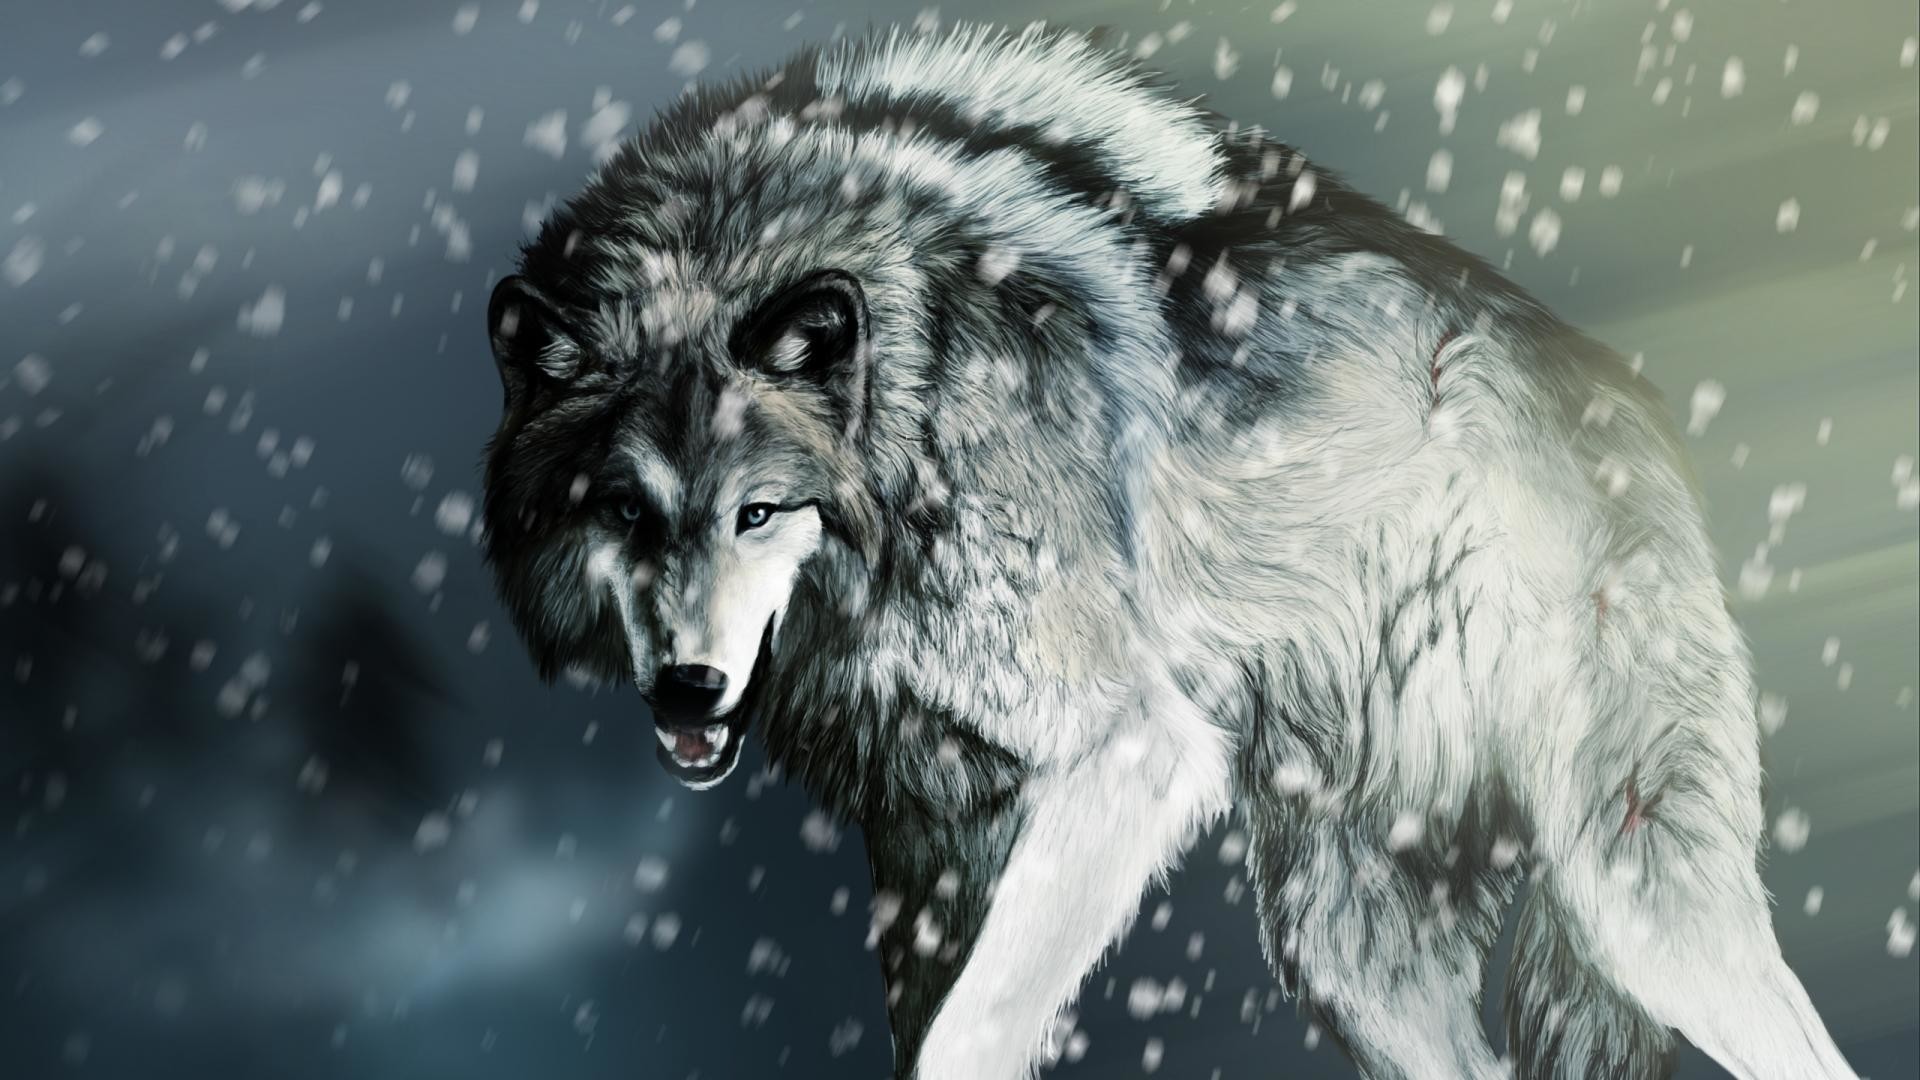 1920x1080  Wallpapers For > Cool Wolf Wallpaper Hd